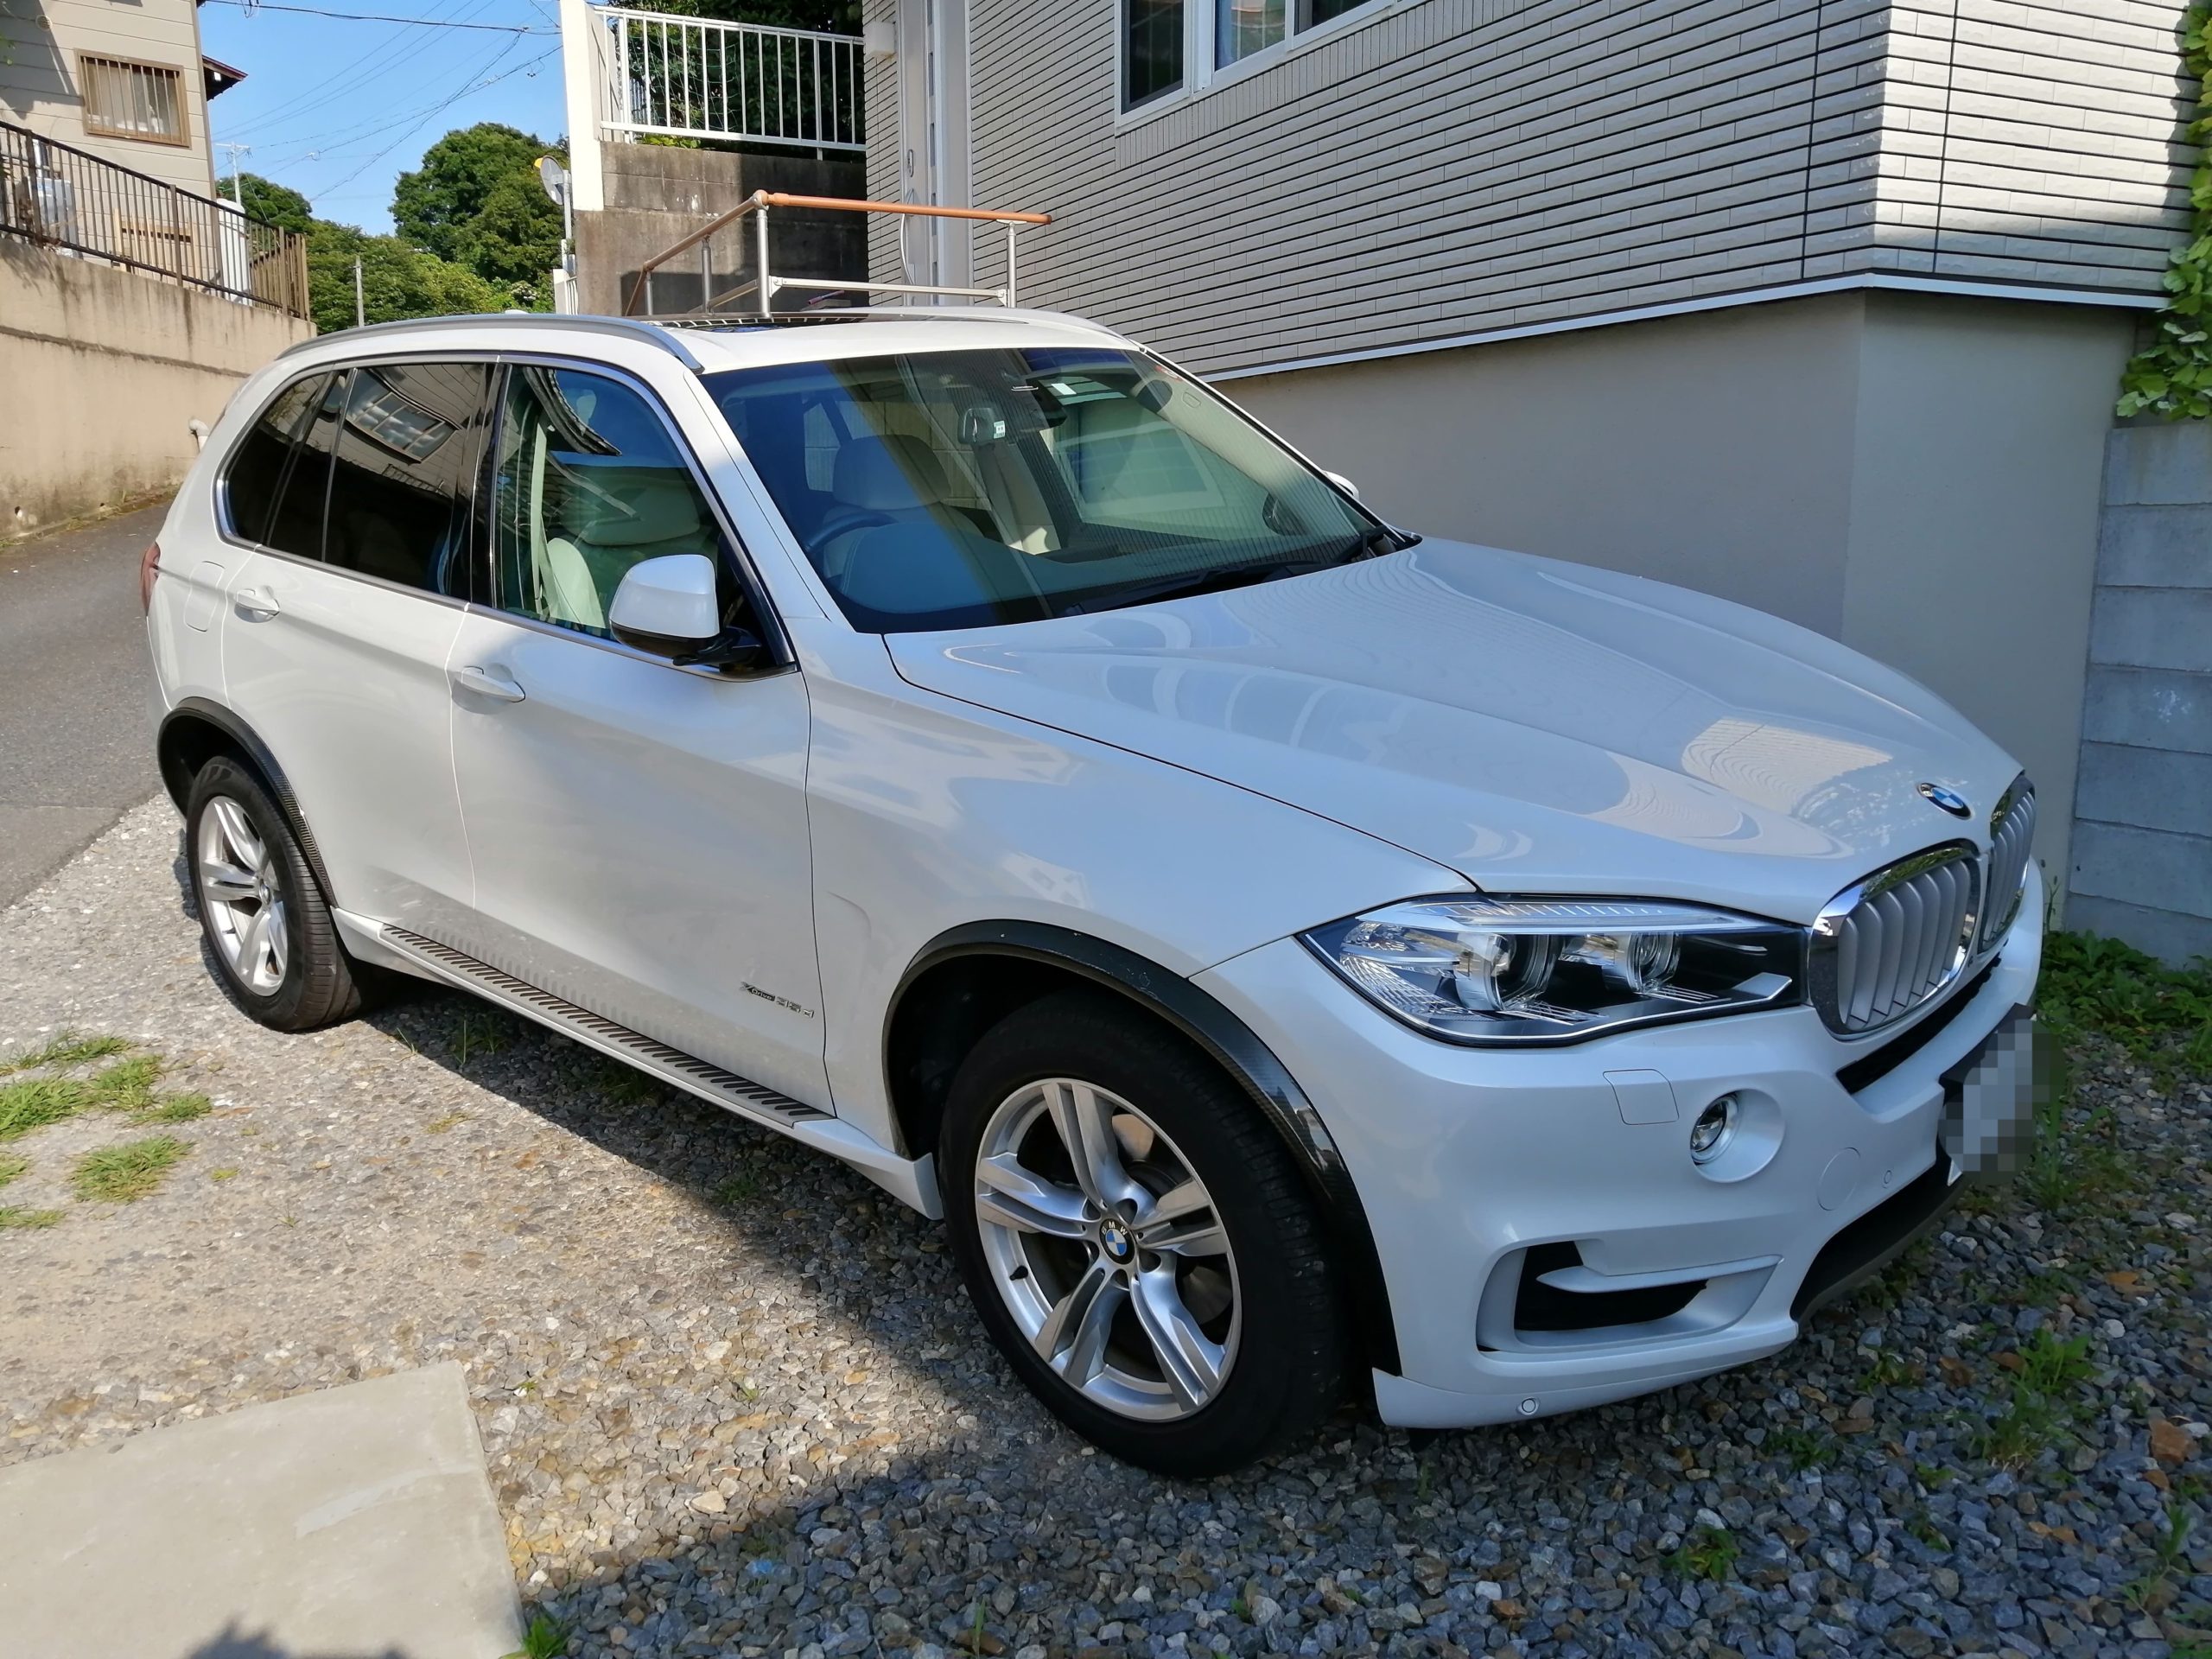 Celtic Tuning - BMW X5 3.0d 254bhp (F15) in for tuning!